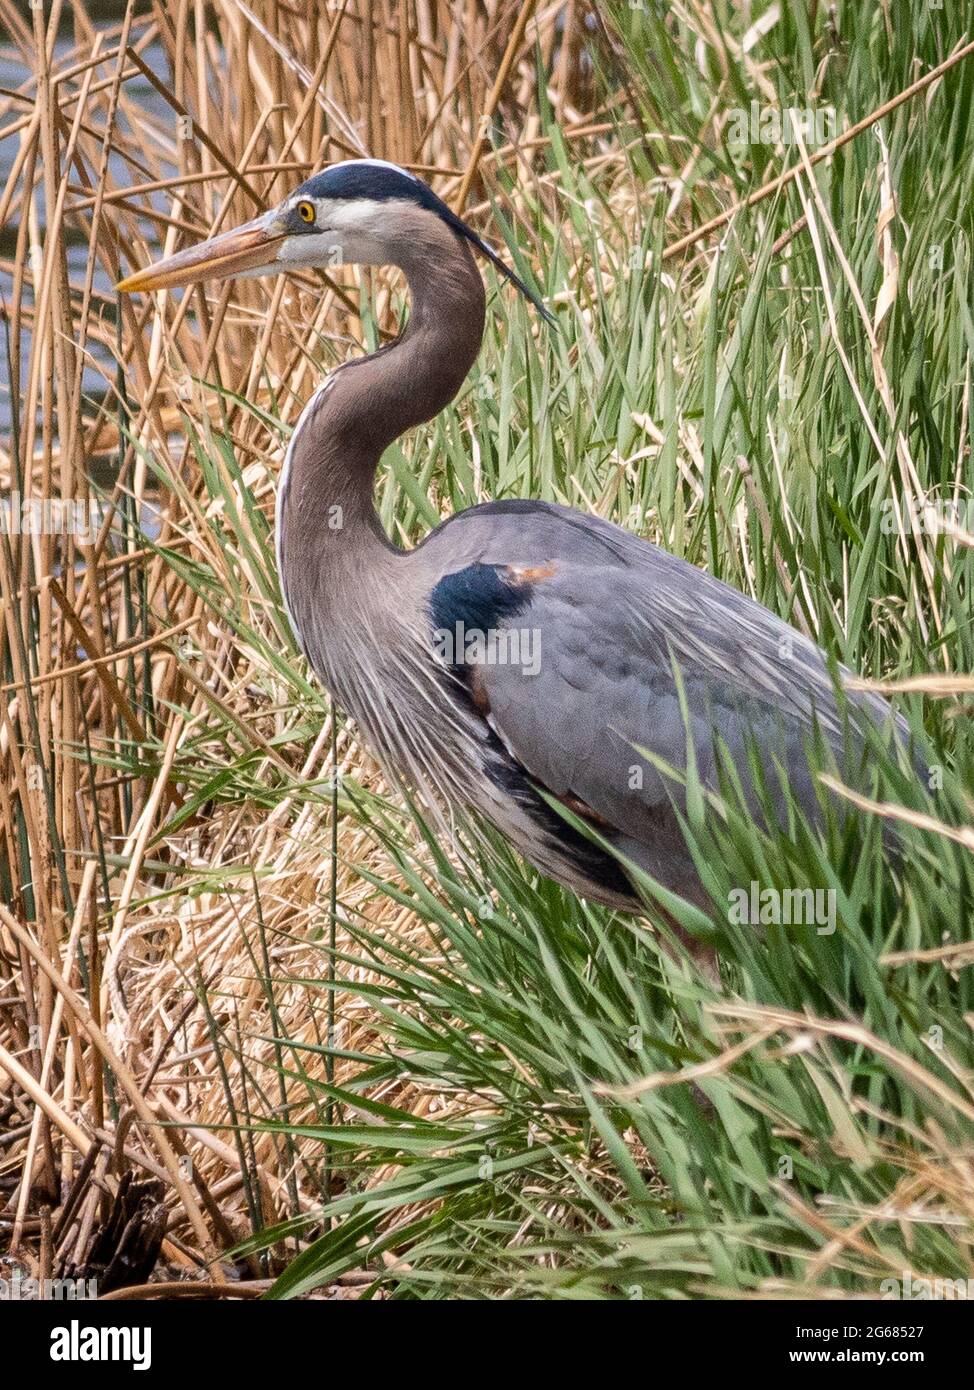 A lone great blue heron hunts for food at a local pond near Flagstaff, AZ. Stock Photo